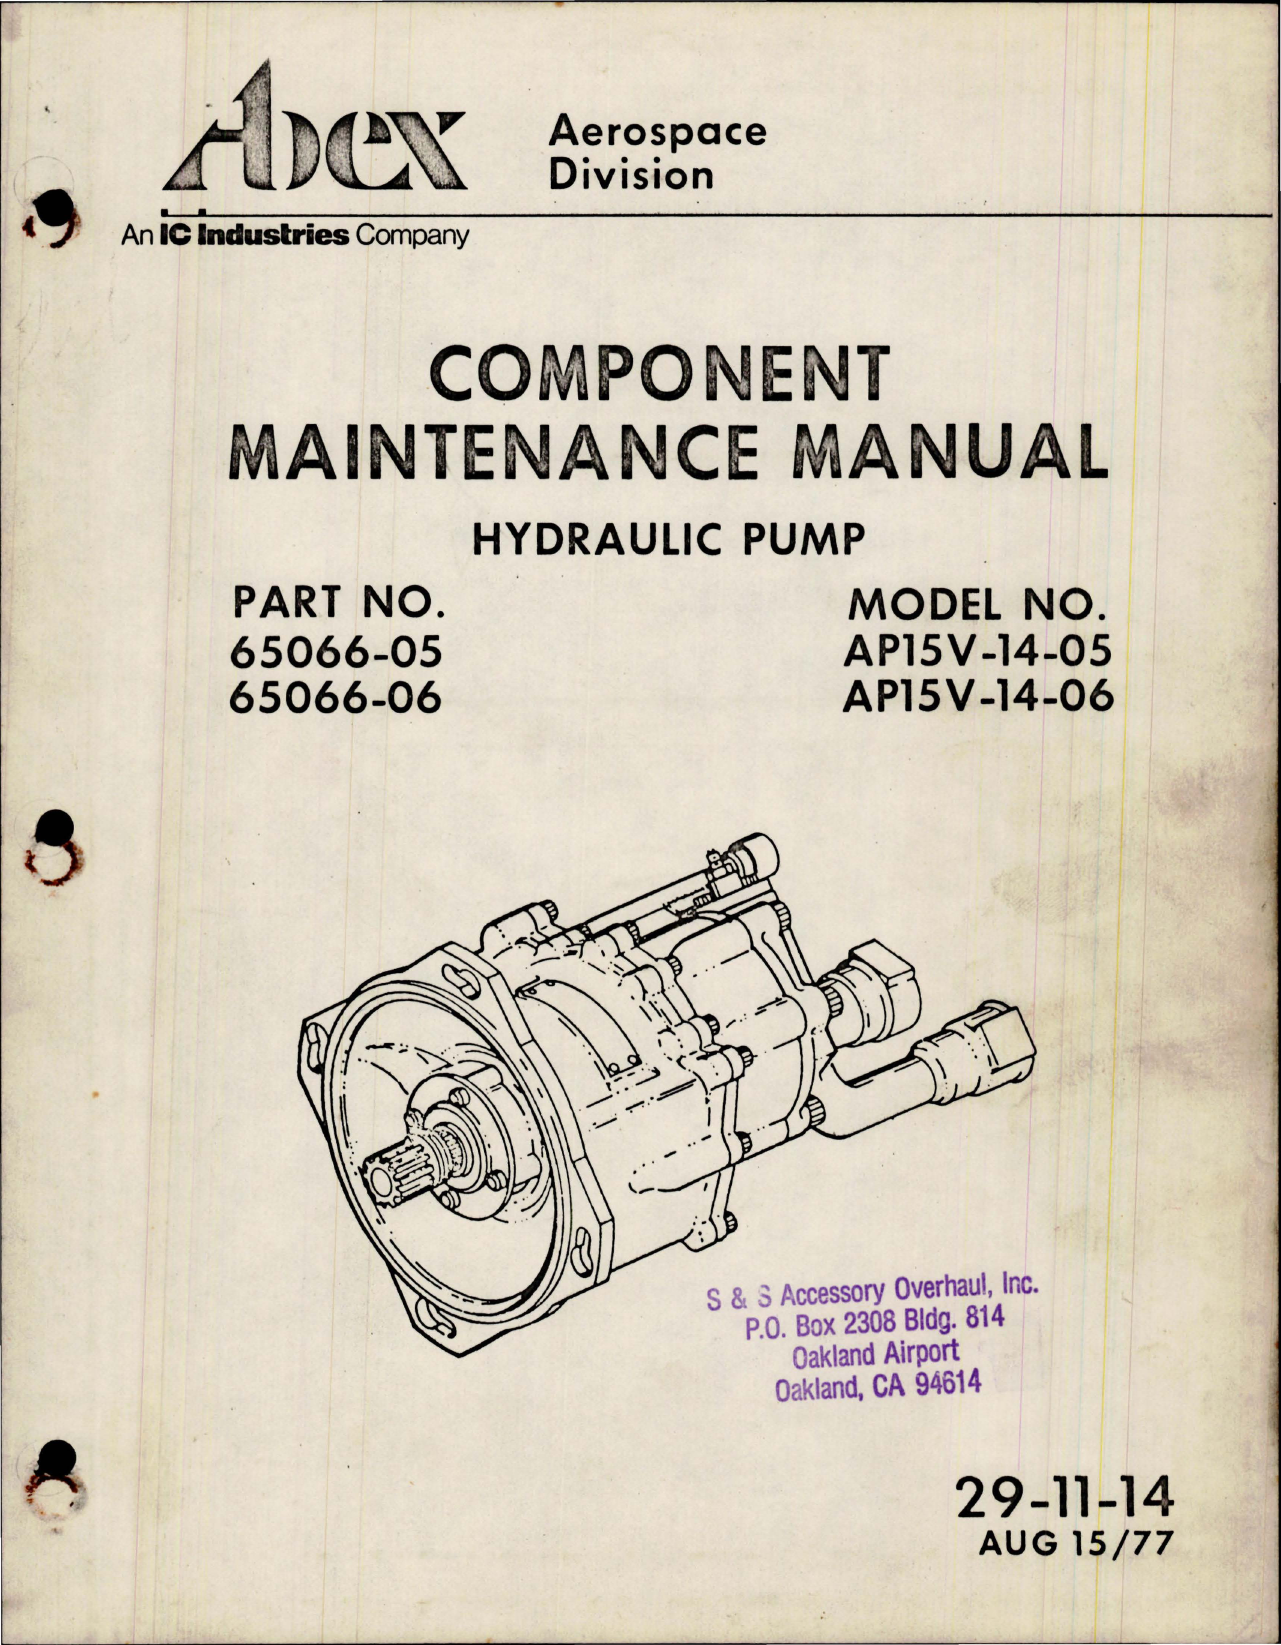 Sample page 1 from AirCorps Library document: Maintenance Manual for Hydraulic Pump - Parts 65066-05 and 65066-06